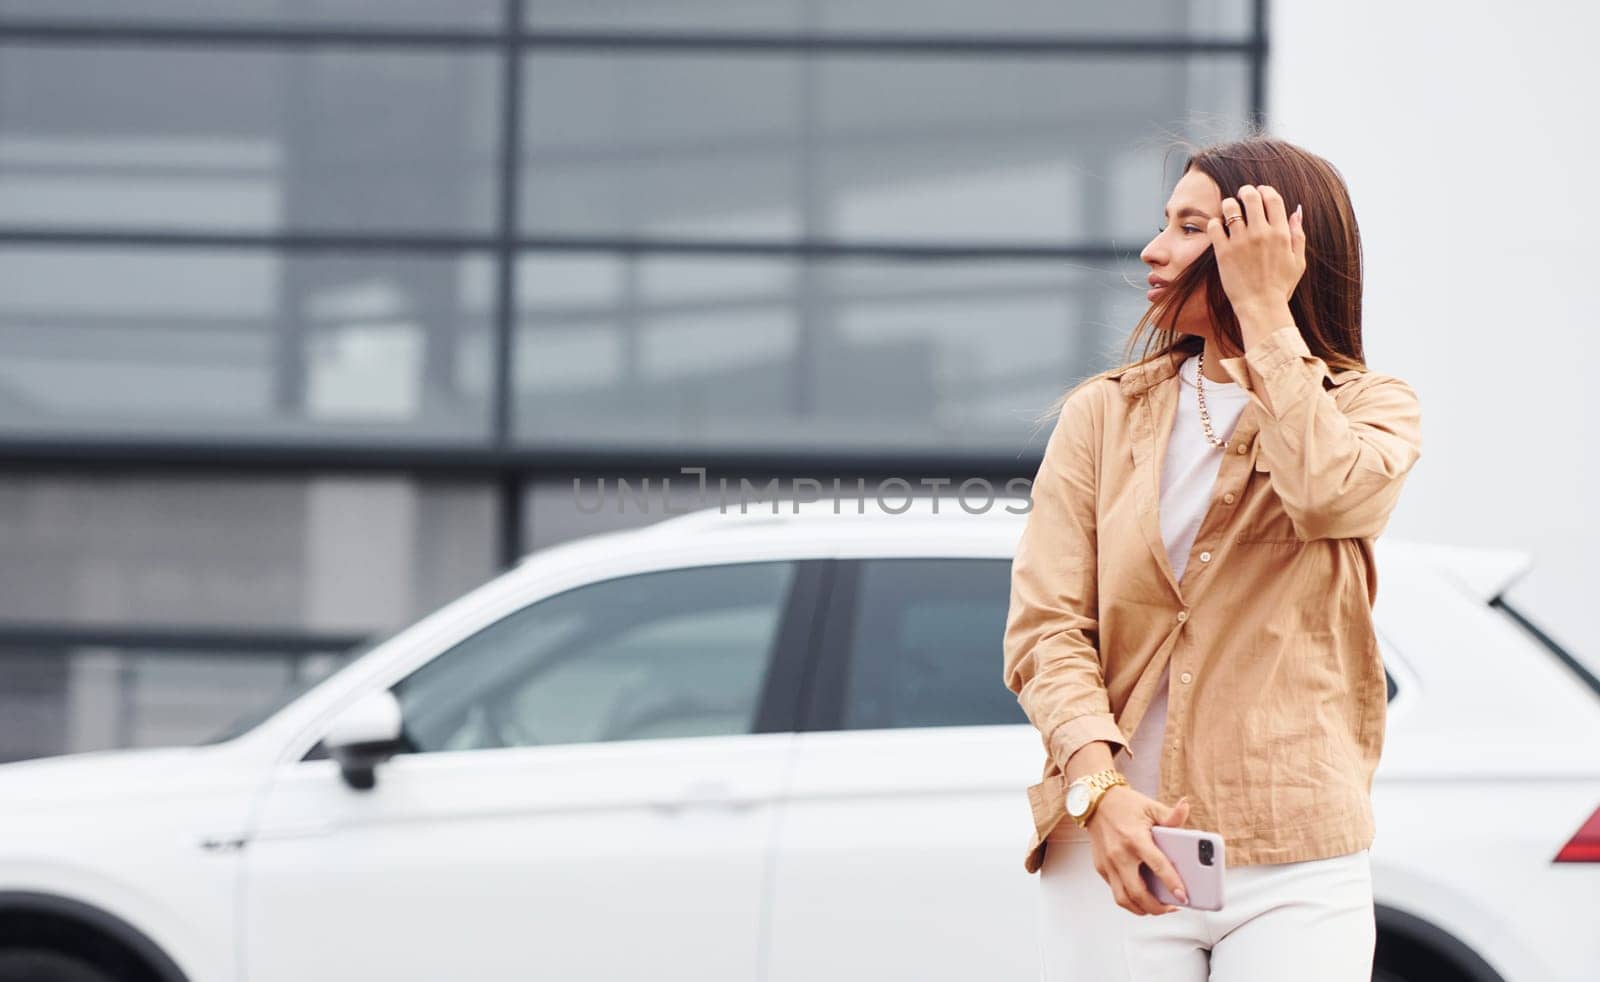 Walks nearby car. Fashionable beautiful young woman and her modern automobile by Standret